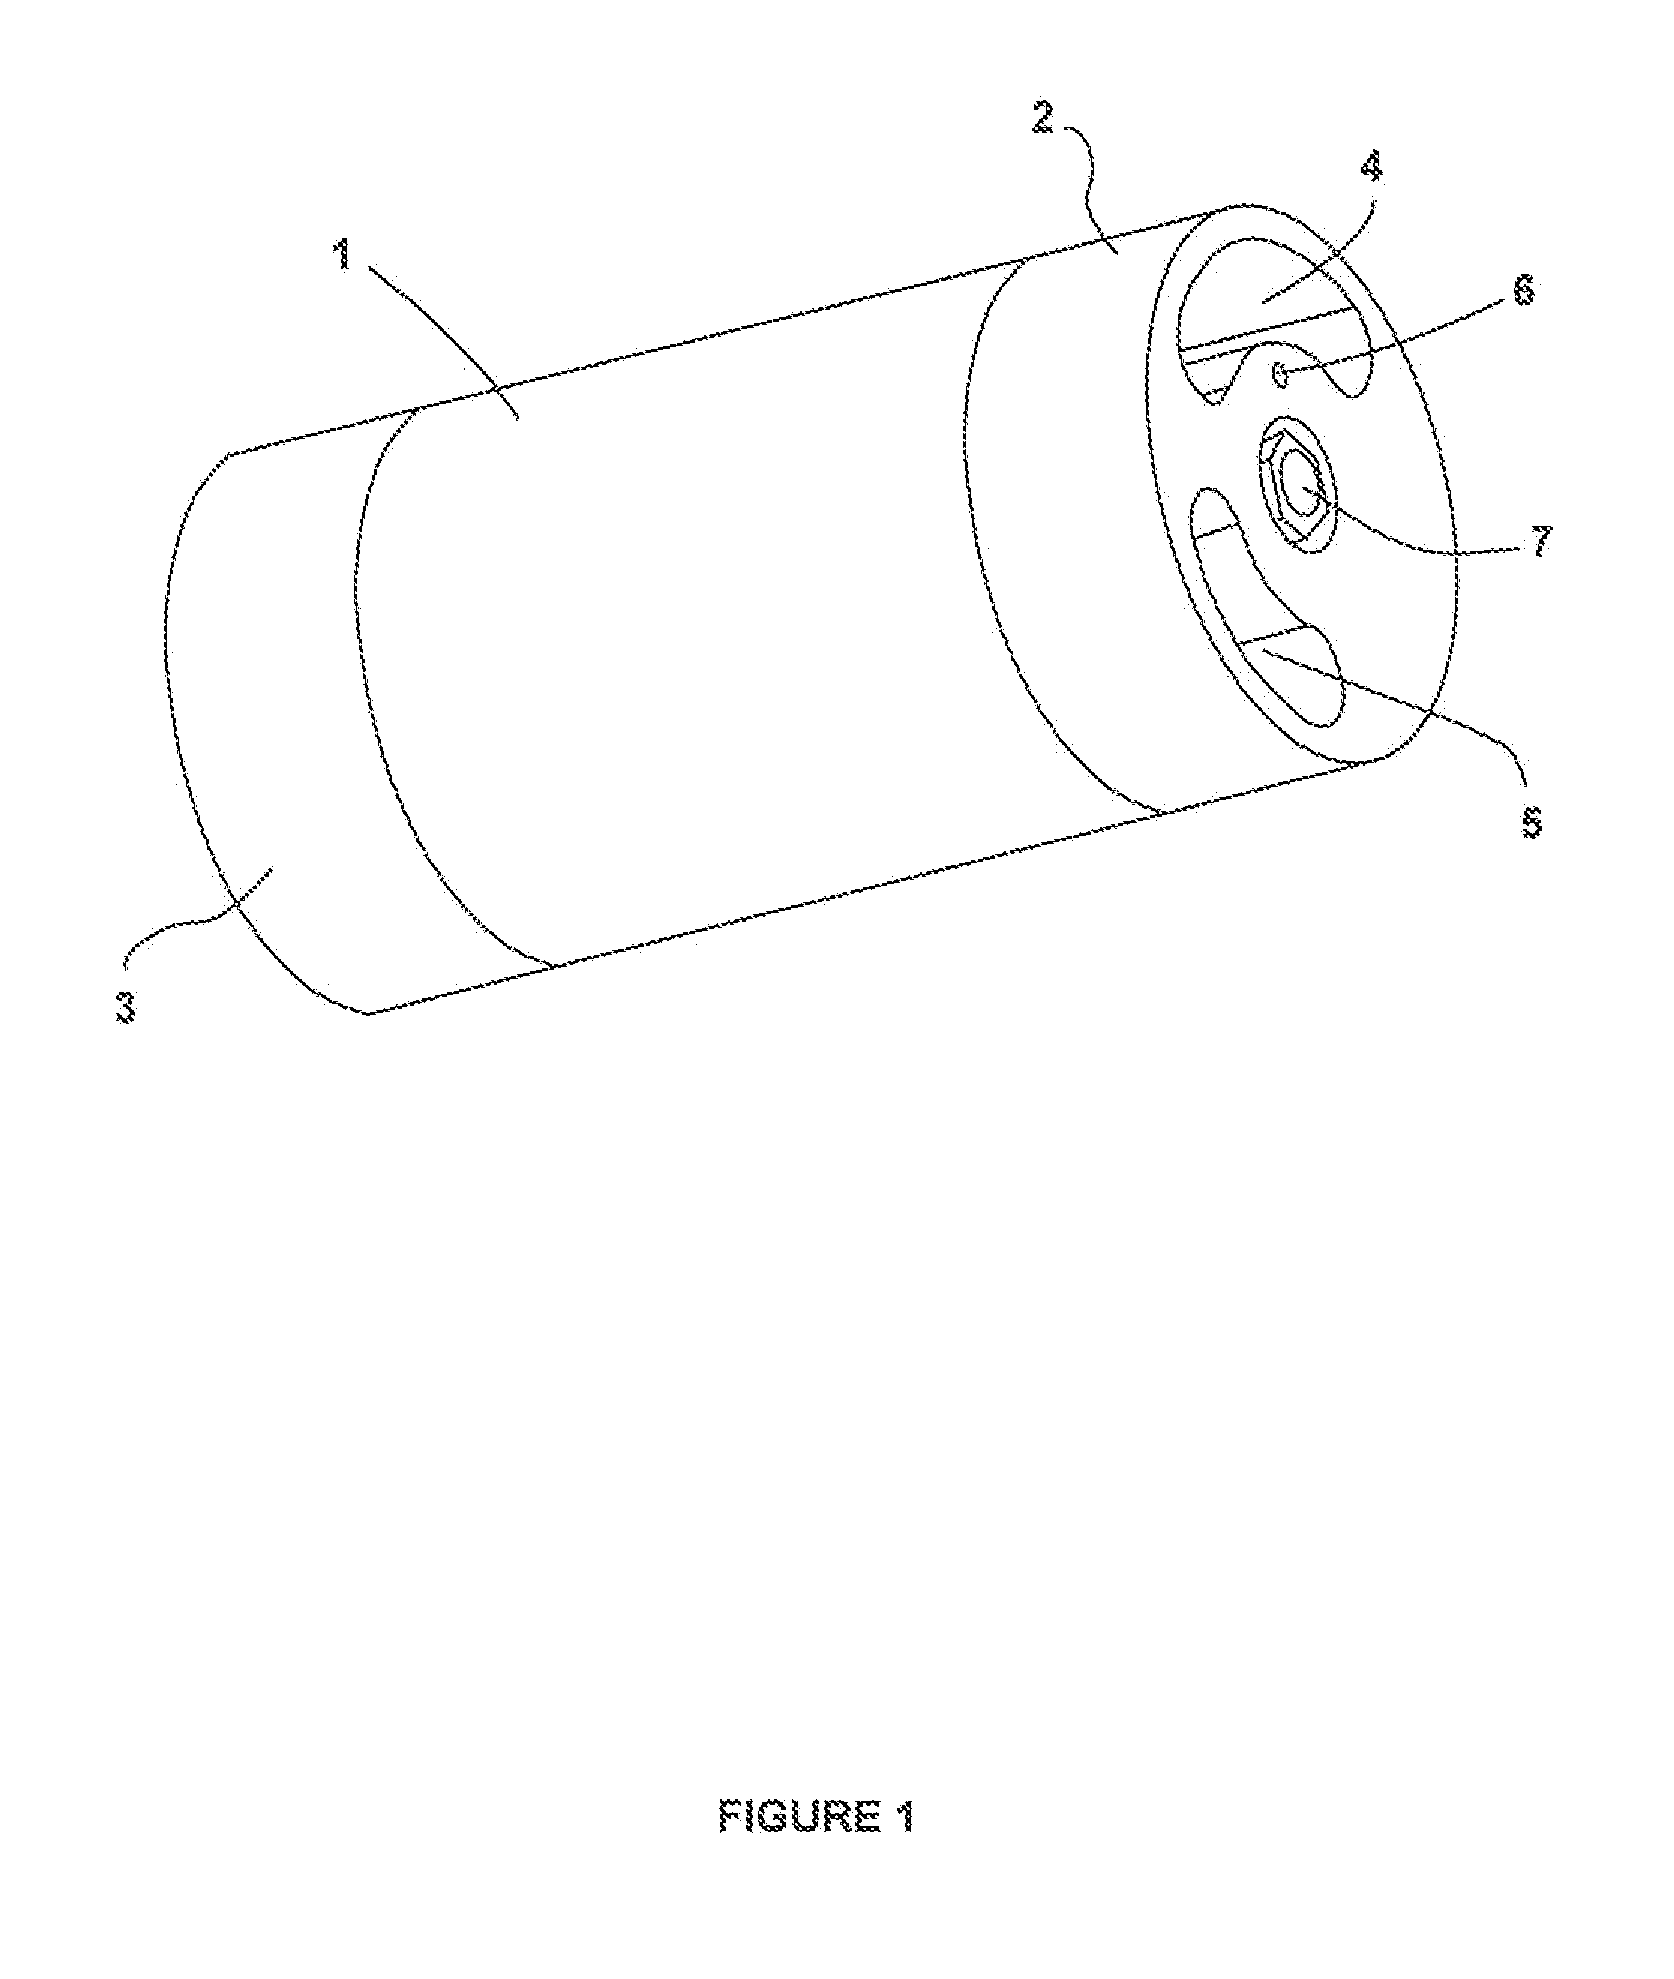 Rotor positioning system in a pressure exchange vessel